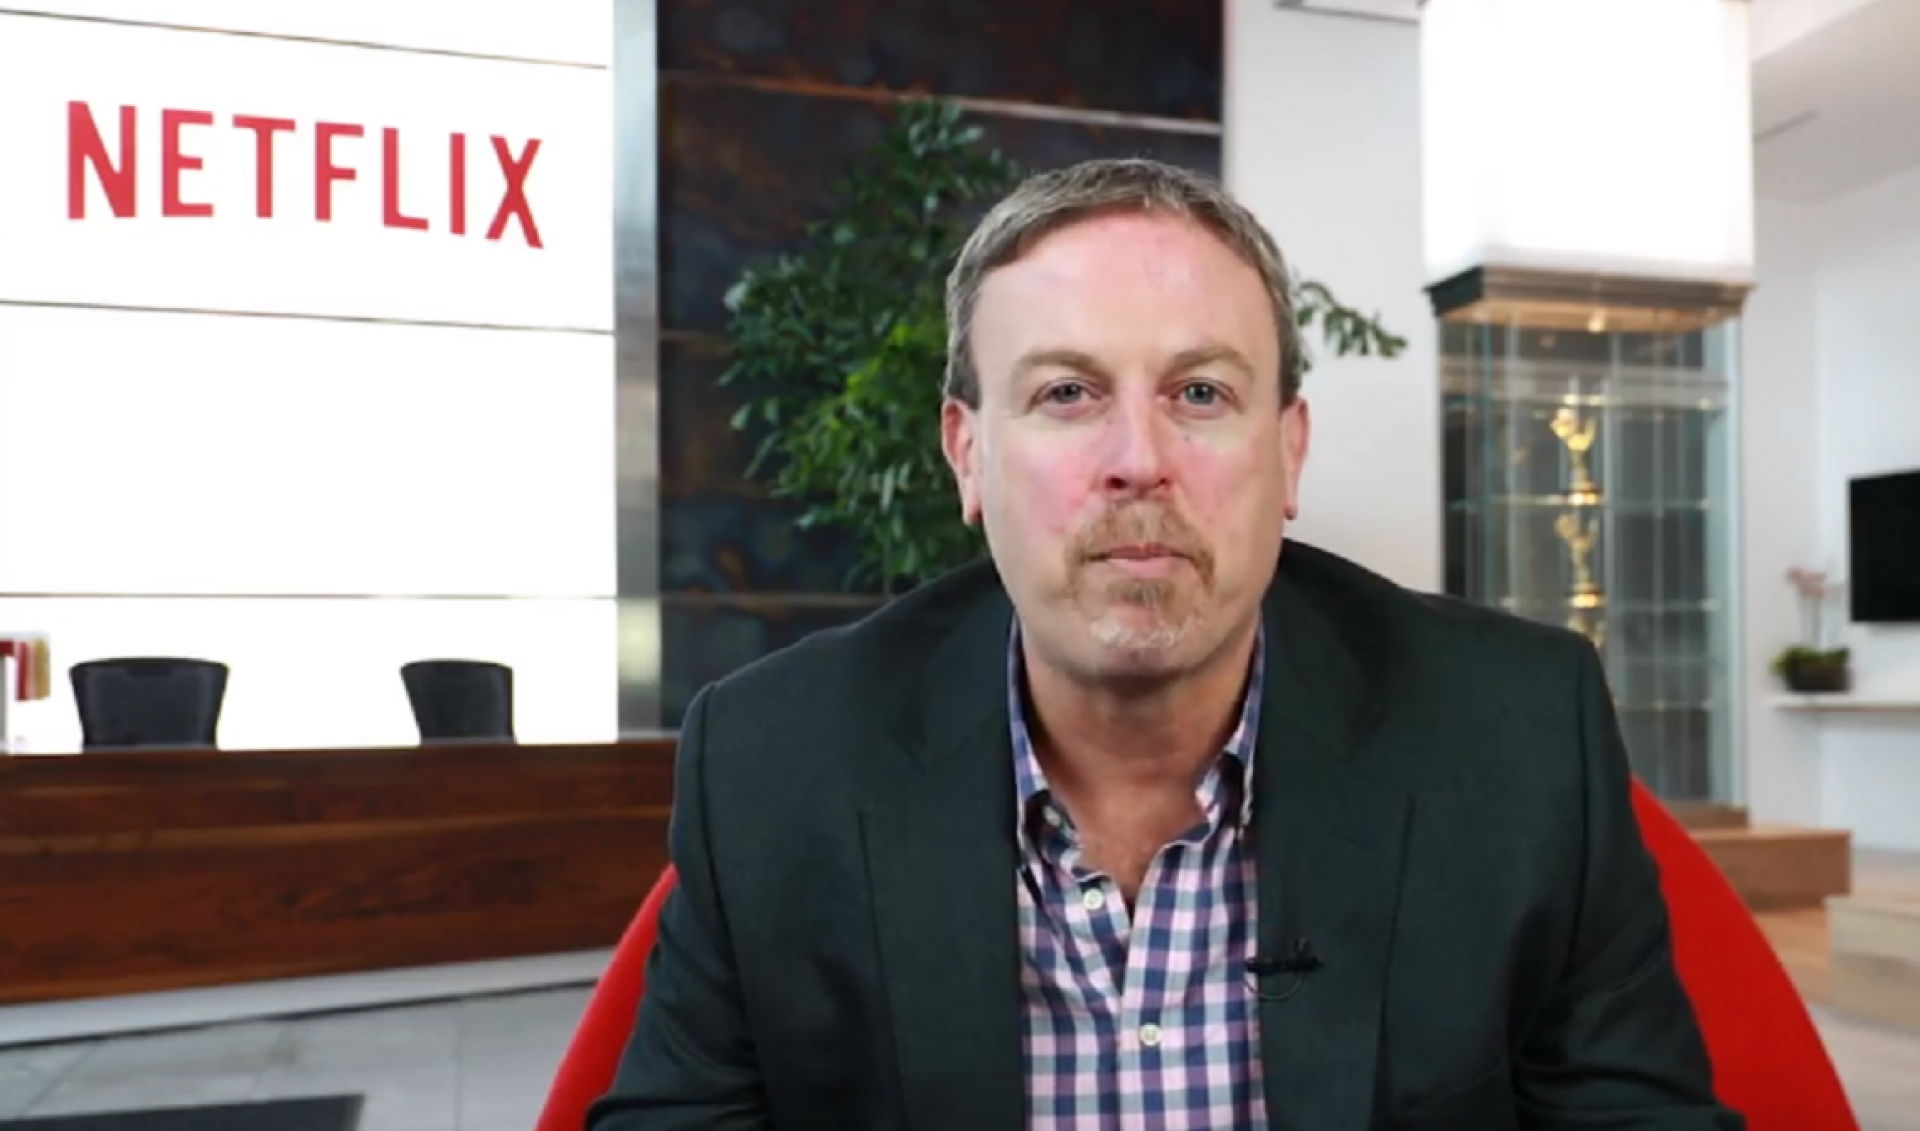 Netflix CFO David Wells To Step Down, Says Company Has “Exciting Growth Plans”